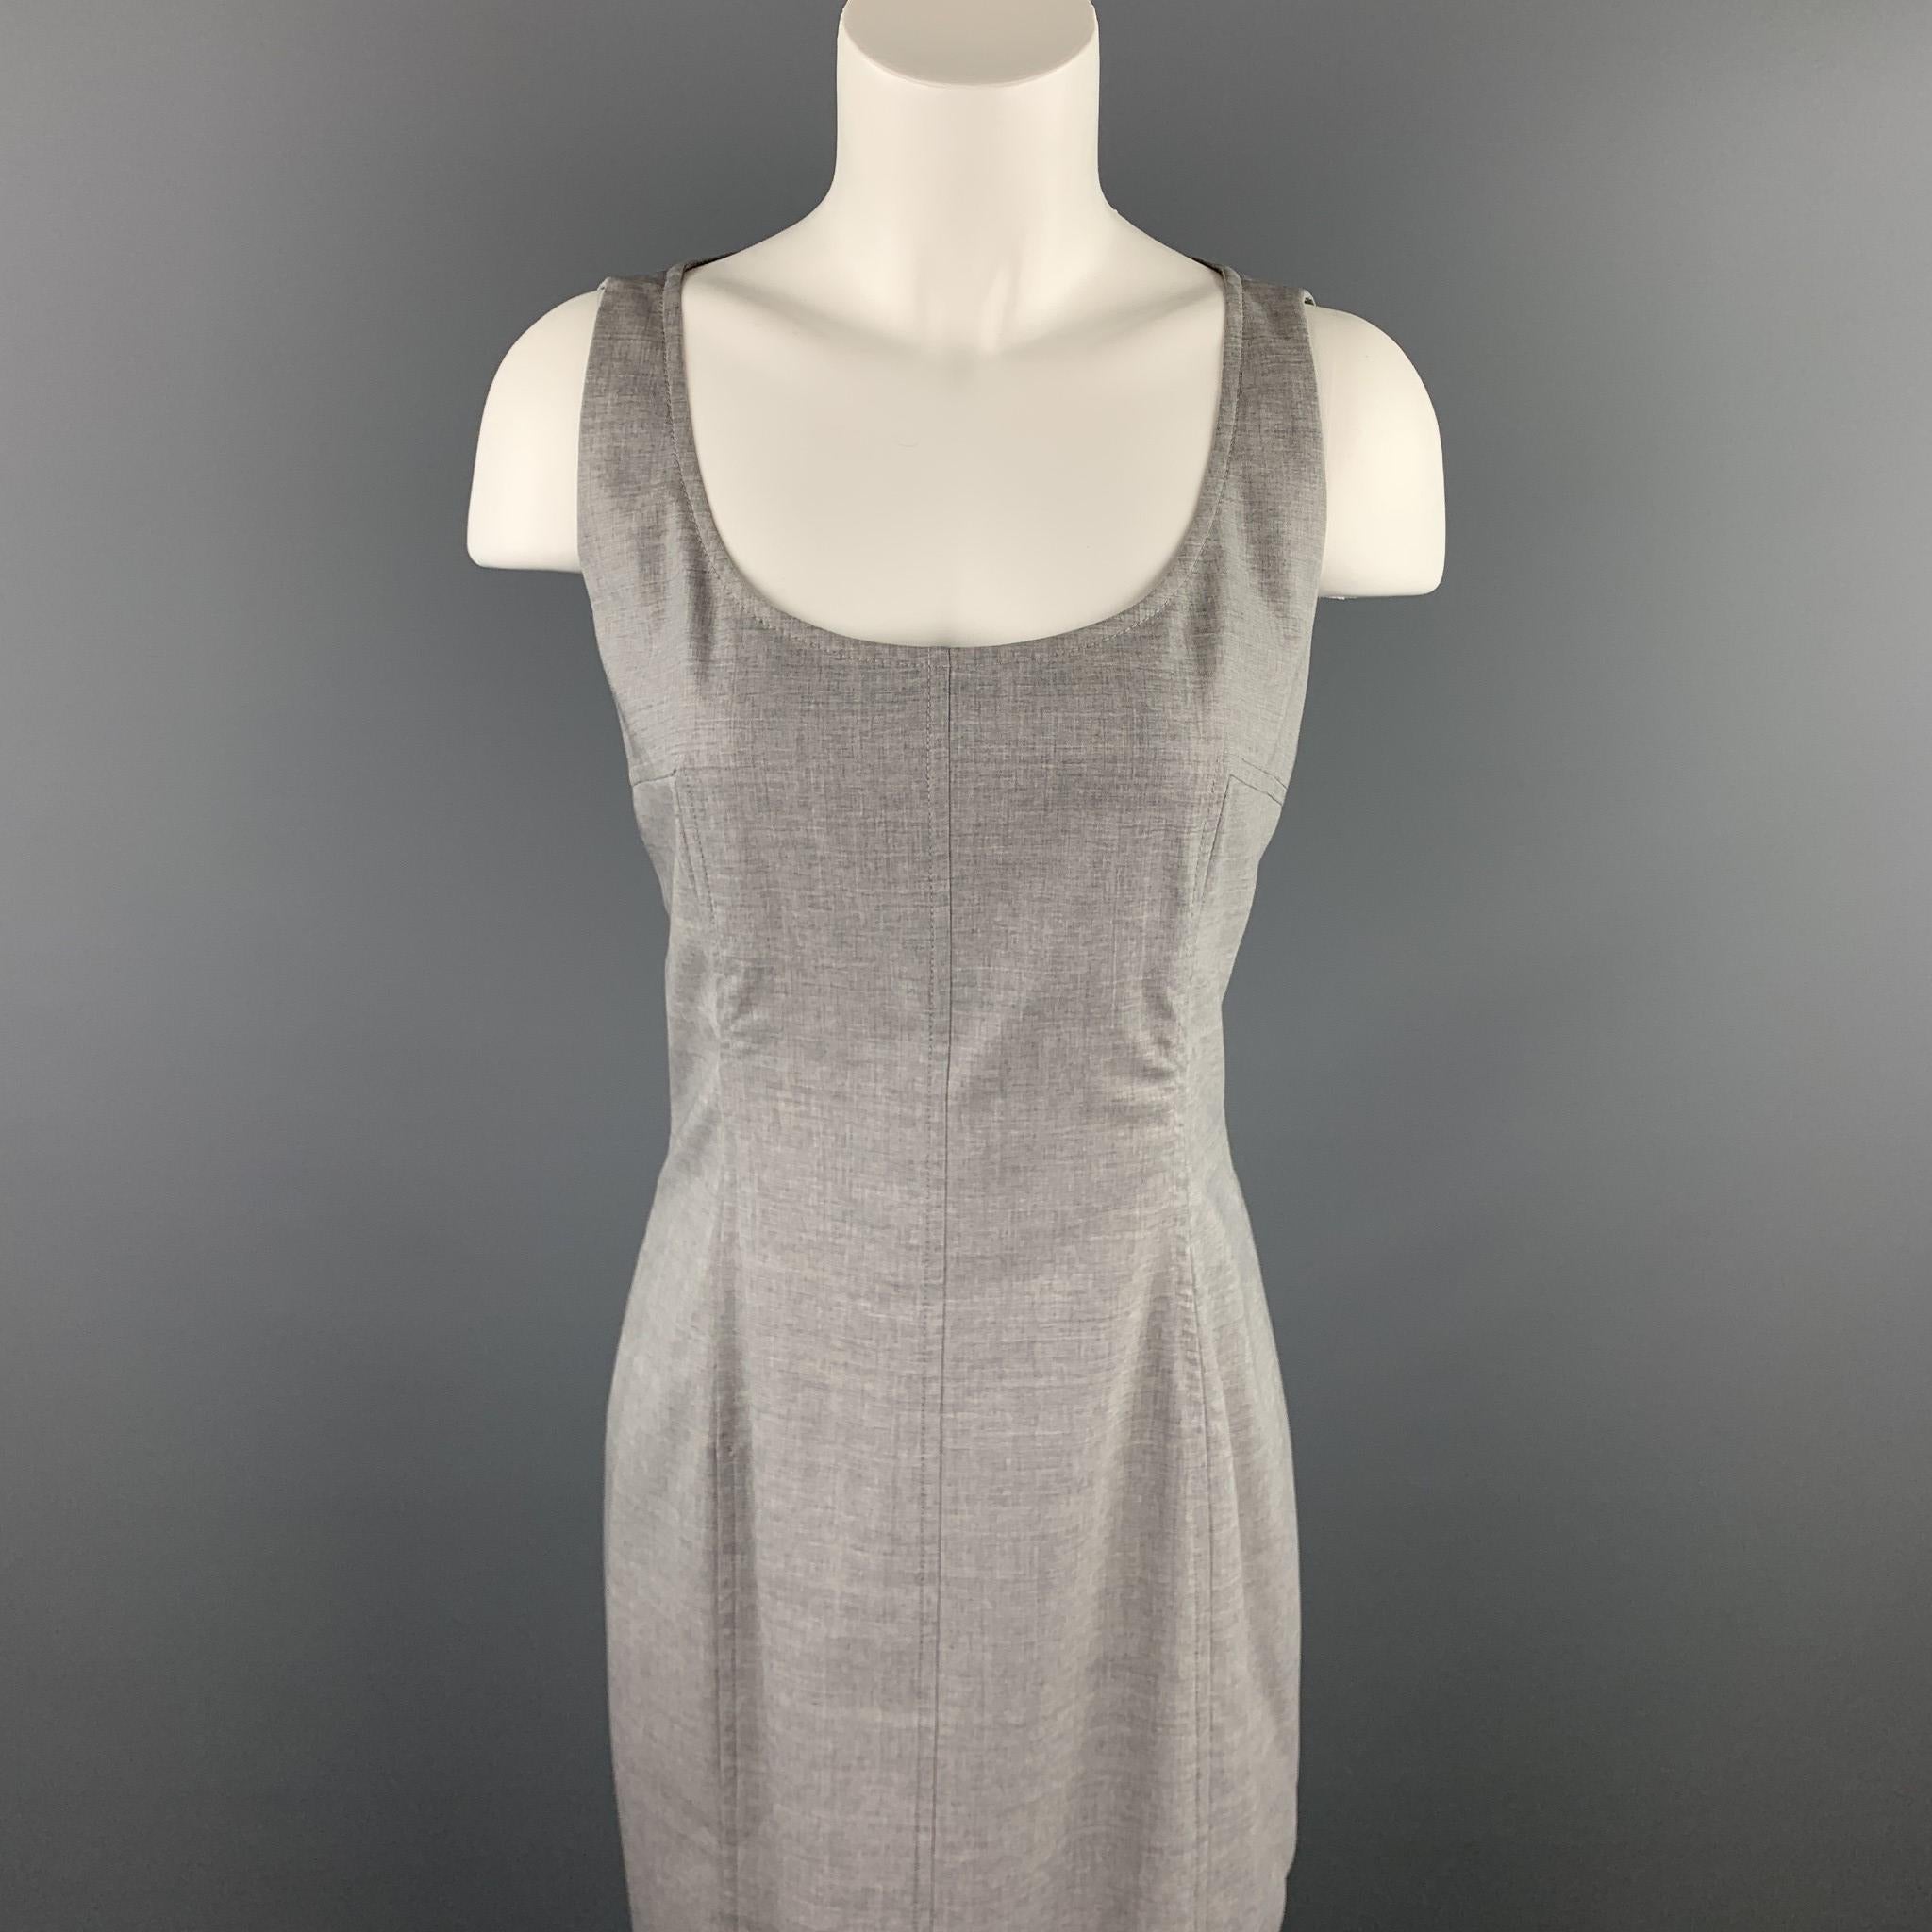 AKRIS sleeveless dress comes in a grey heather acetate / viscose with a gray liner featuring a shift style, scoop neck, and a back zip up closure. 

Very Good Pre-Owned Condition.
Marked: US 6 / F 38 / D 36

Measurements:

Shoulder: 13.5 in.
Bust: